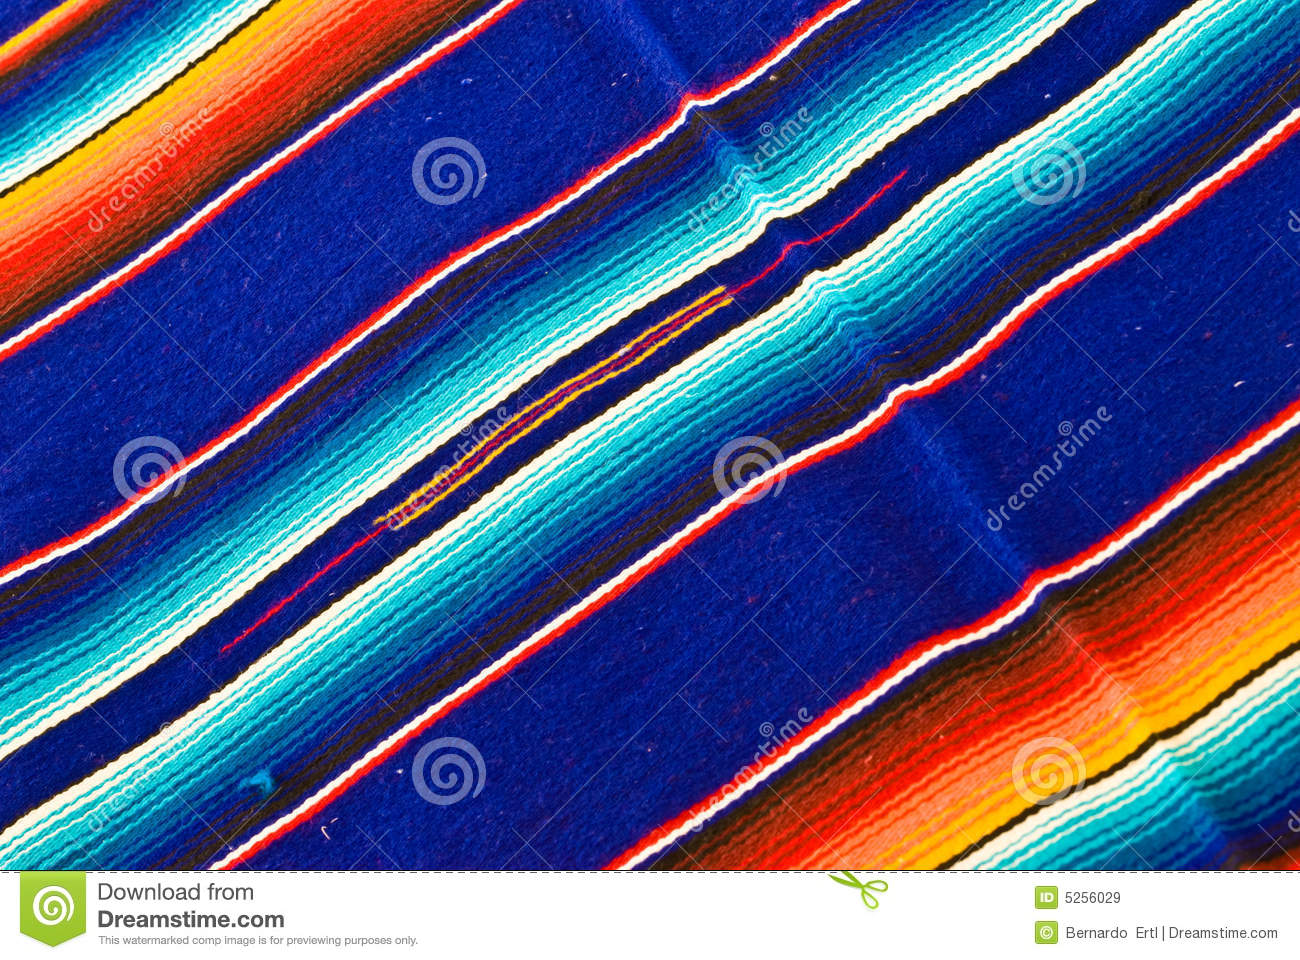 Colorful Mexican Blankets Royalty Free Stock Images   Image  5256029